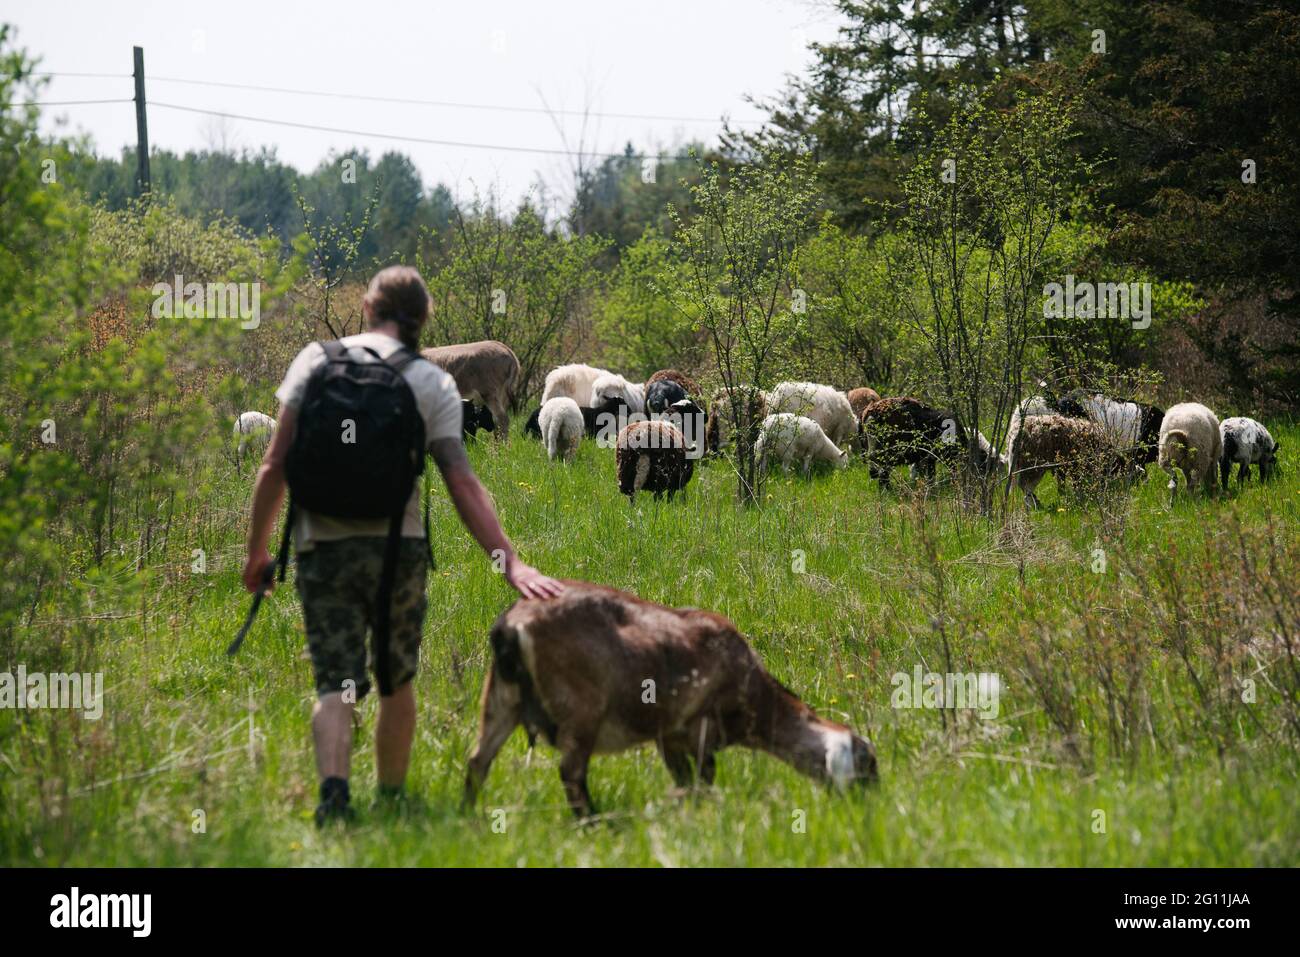 Canada, Ontario, Kingston, Rear view of man walking with goat and sheep in field Stock Photo